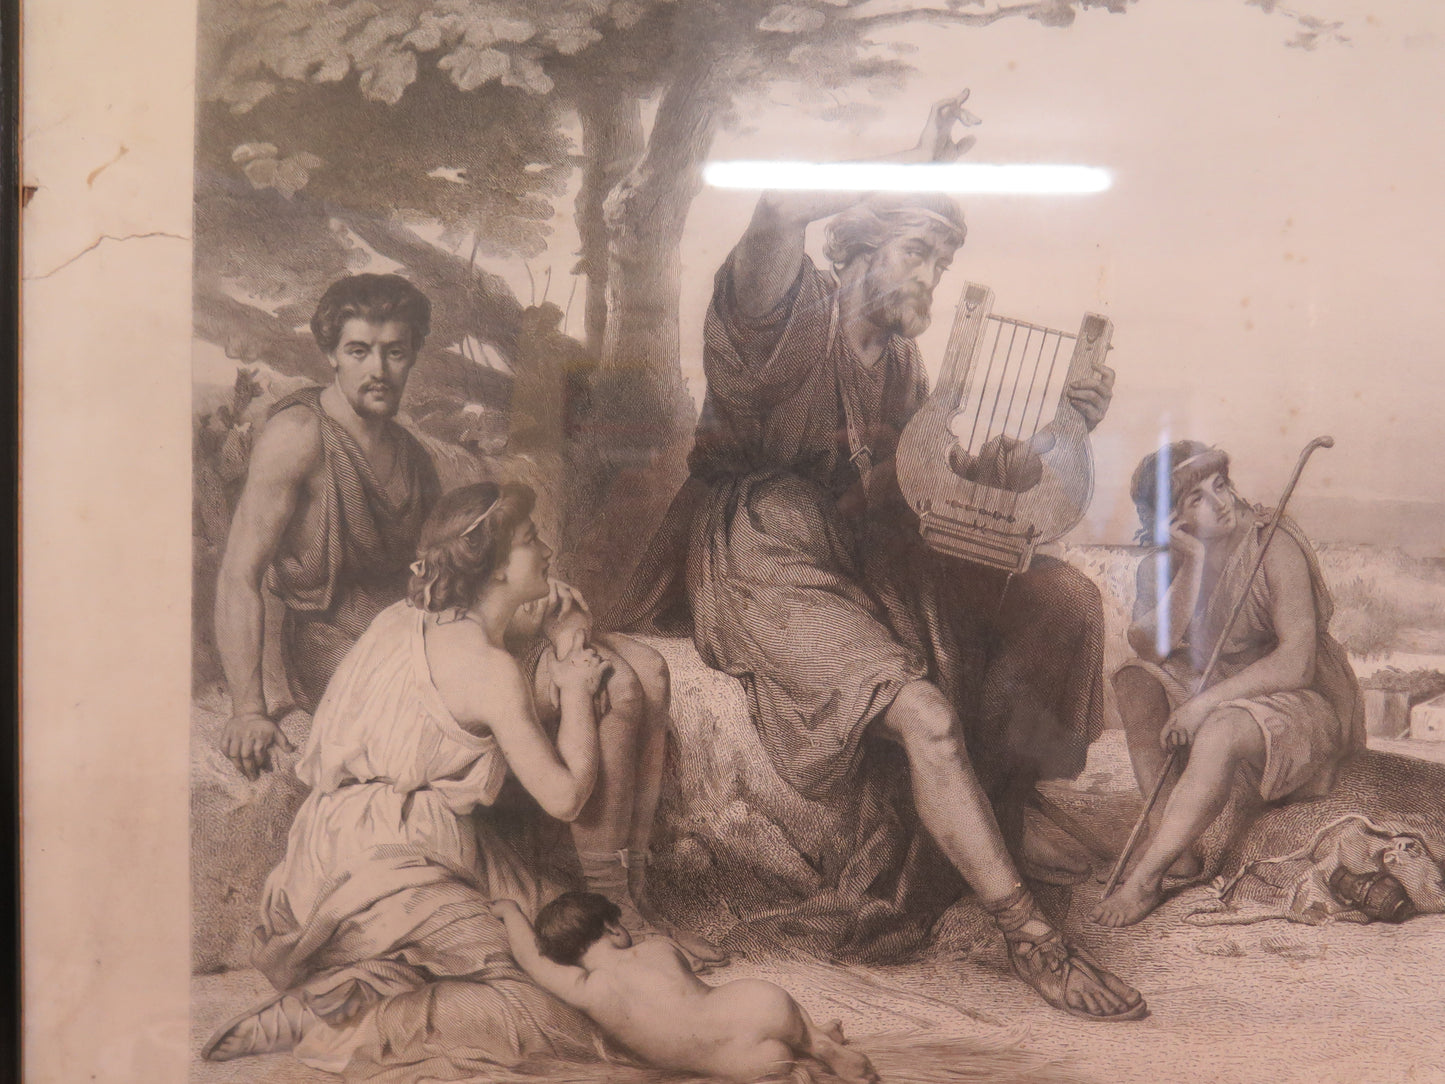 ANTIQUE PRINT BY COOOMANS ALLAIS NEOCLASSICAL SCENE WOODEN FRAME LARGE SIZE RB